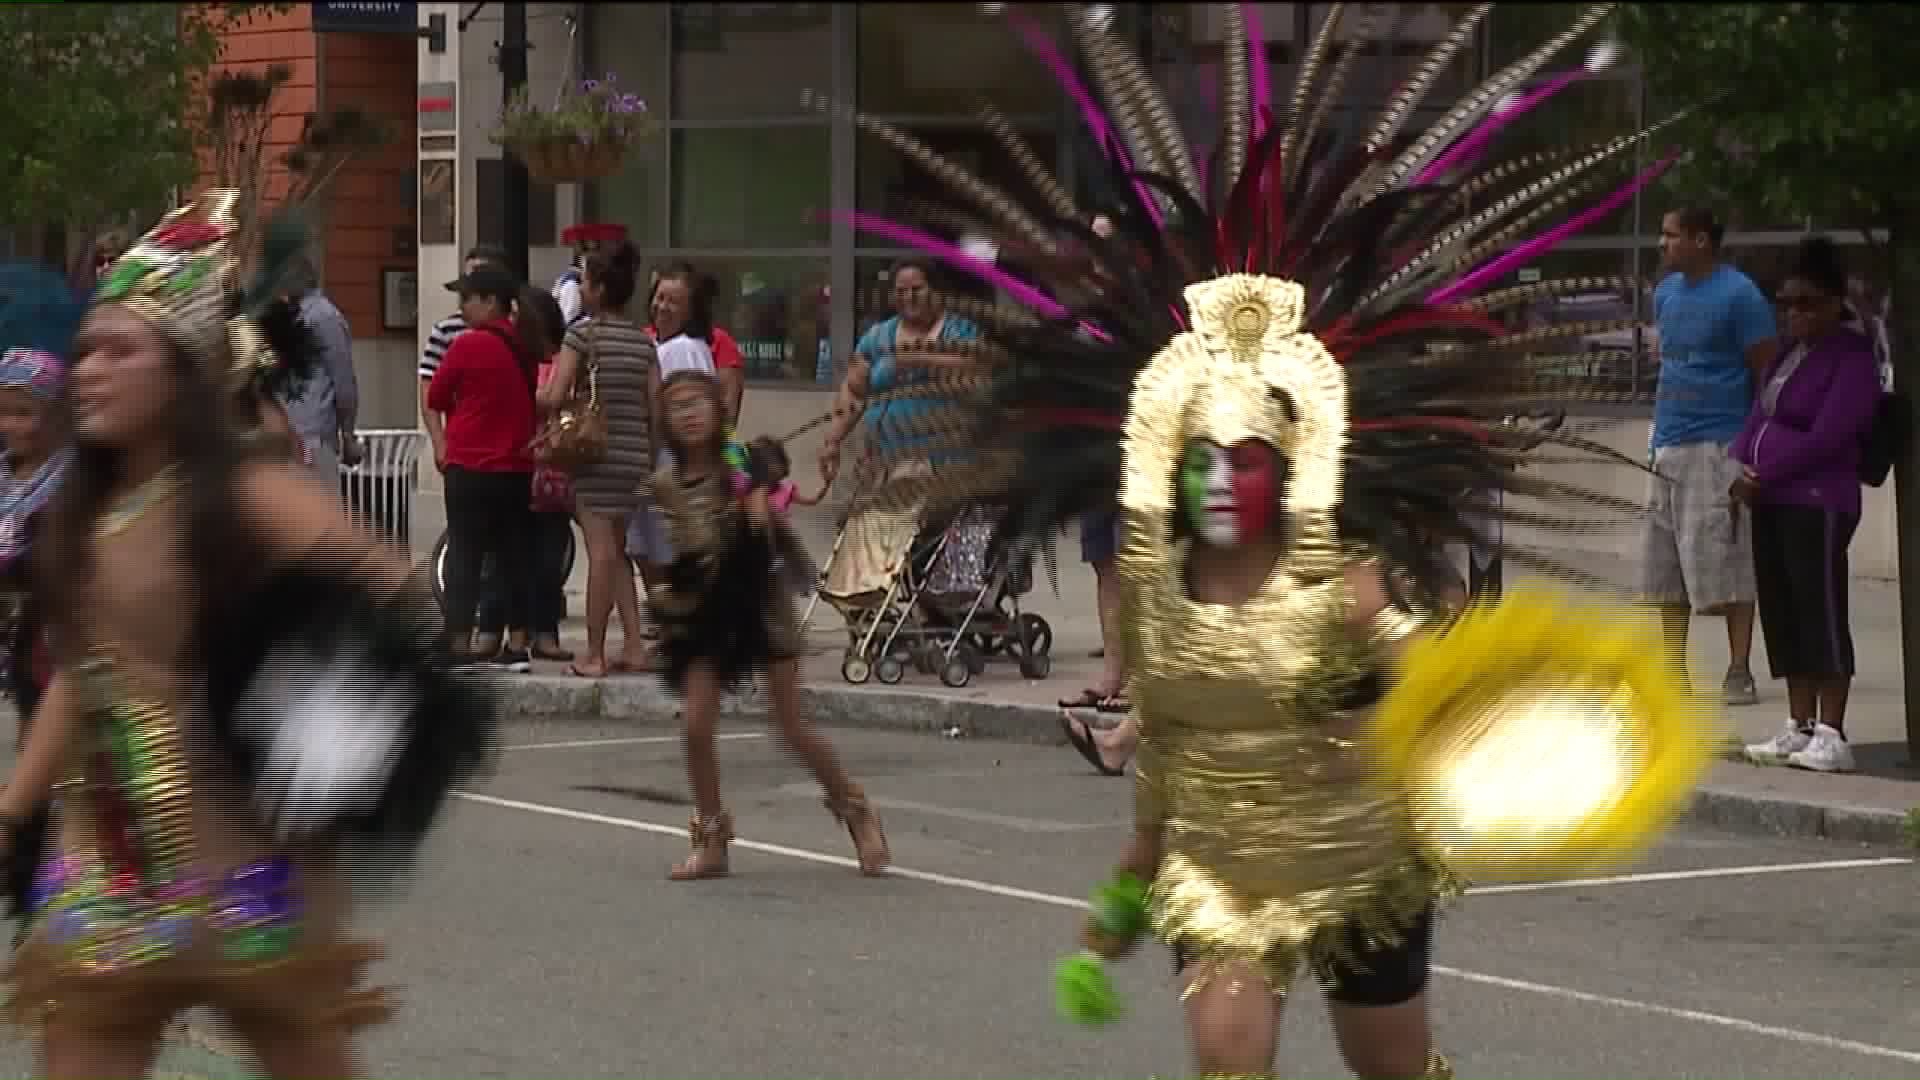 Inaugural Multicultural Parade and Festival in Wilkes-Barre